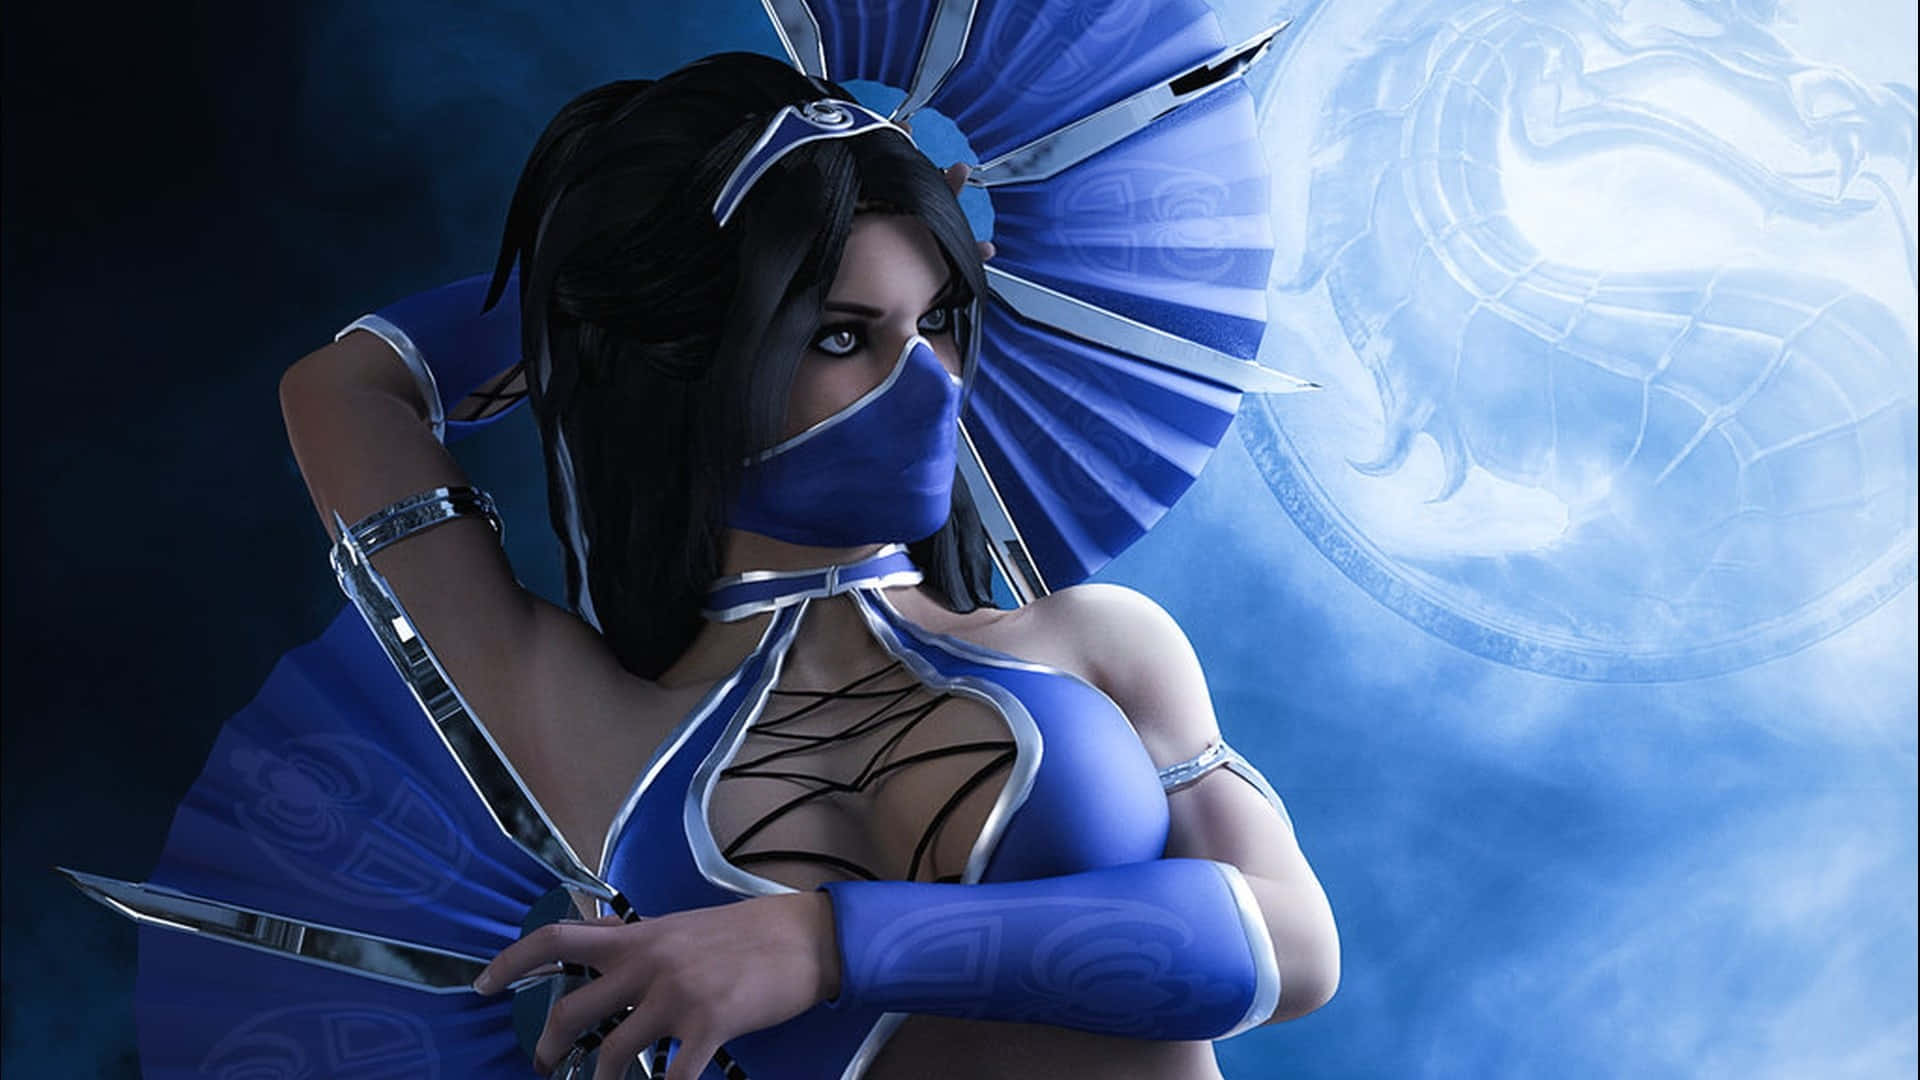 Caption: Iconic Mortal Kombat Characters in Action Wallpaper